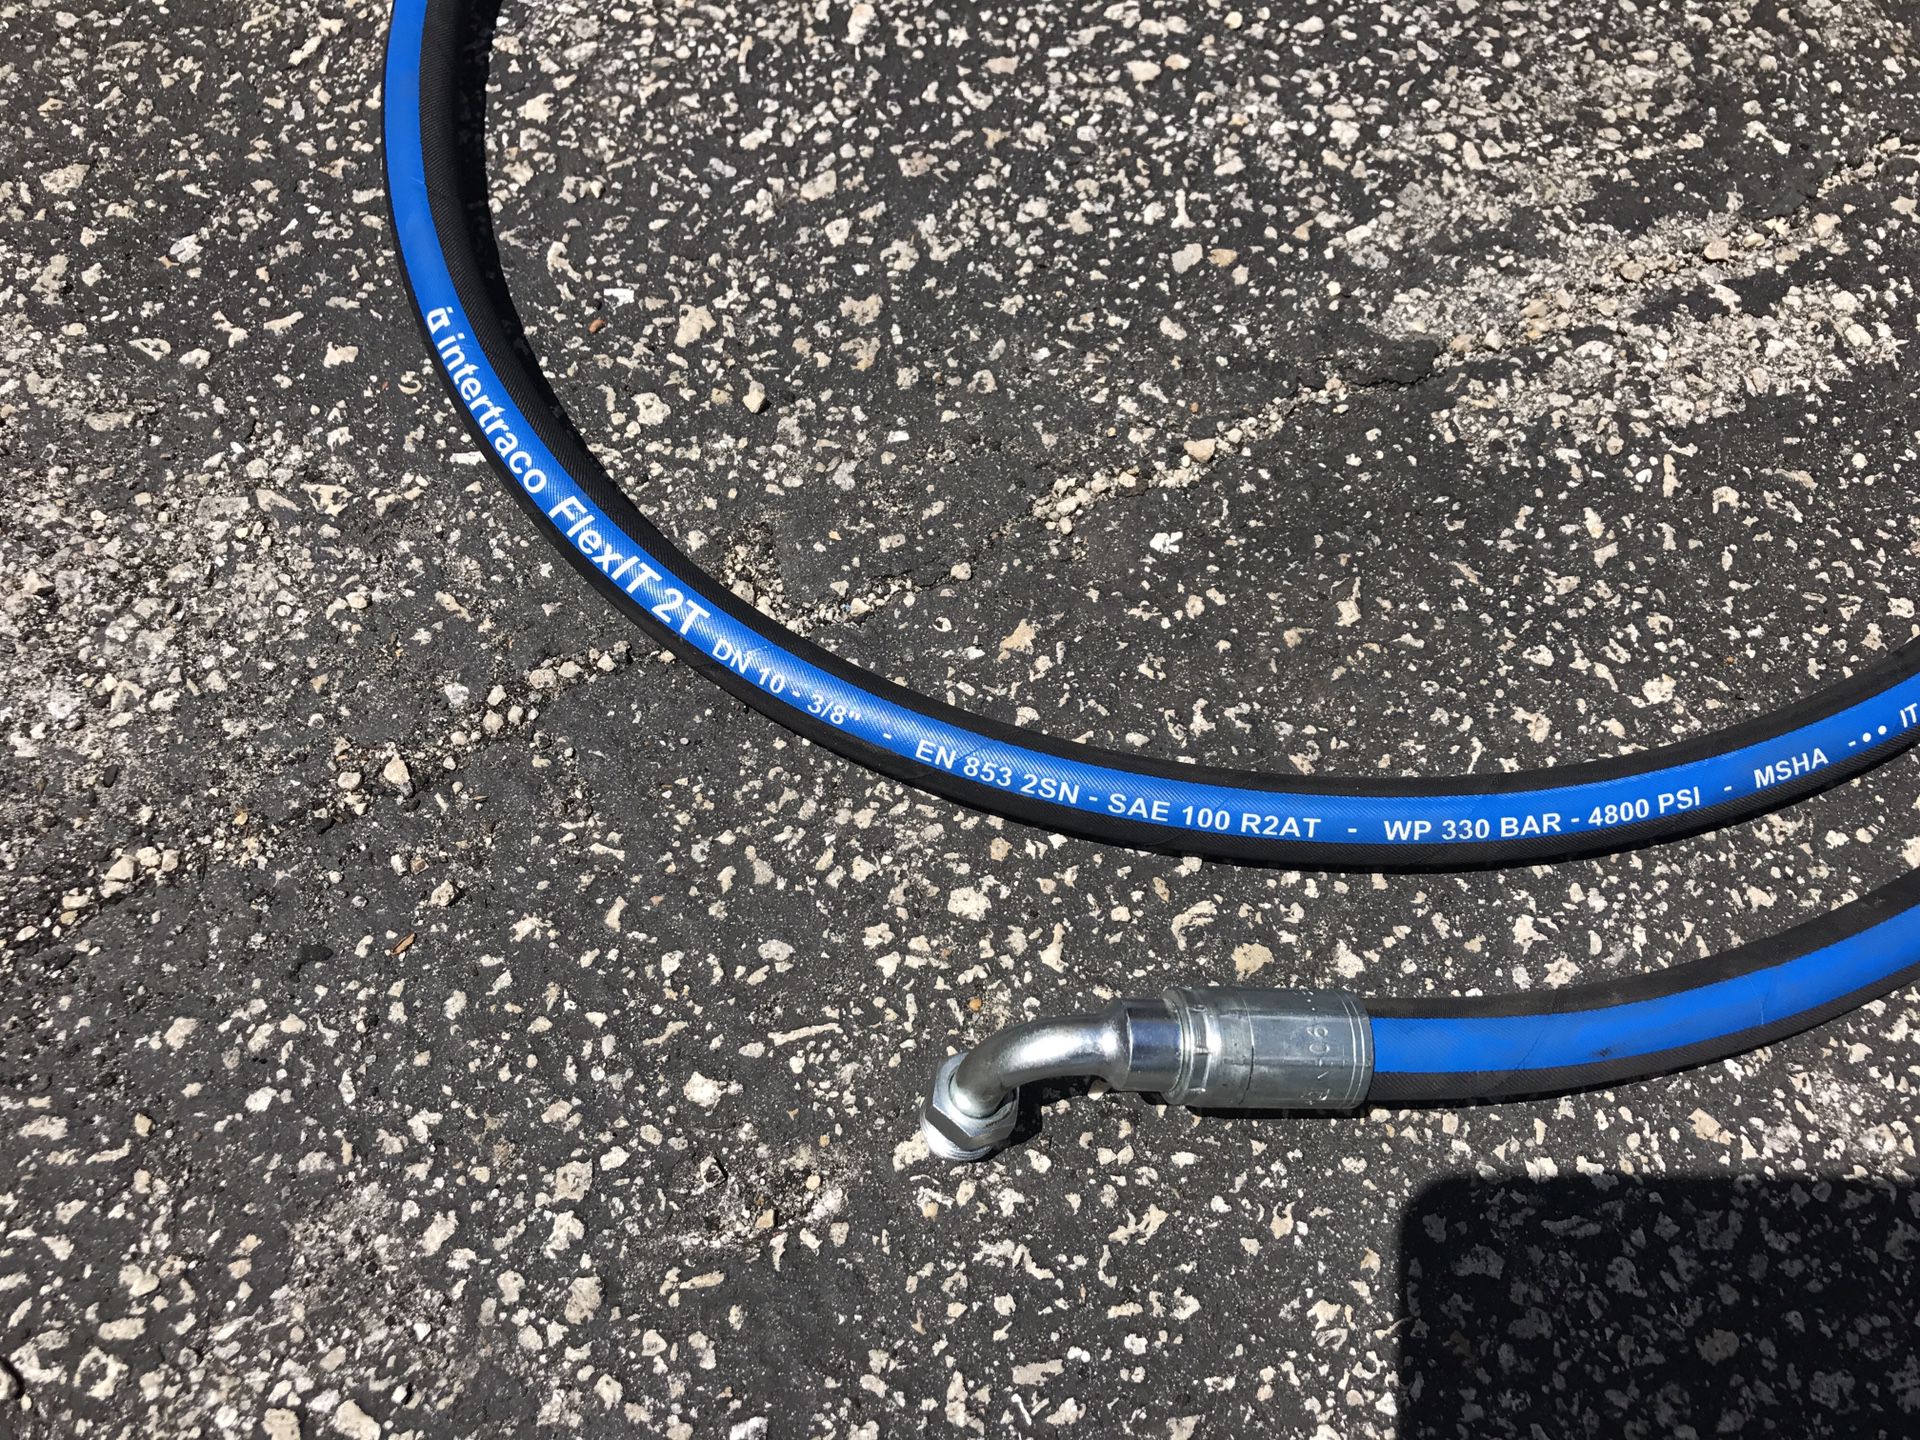 Forklift leaking ? Need new hoses Mobile or parts